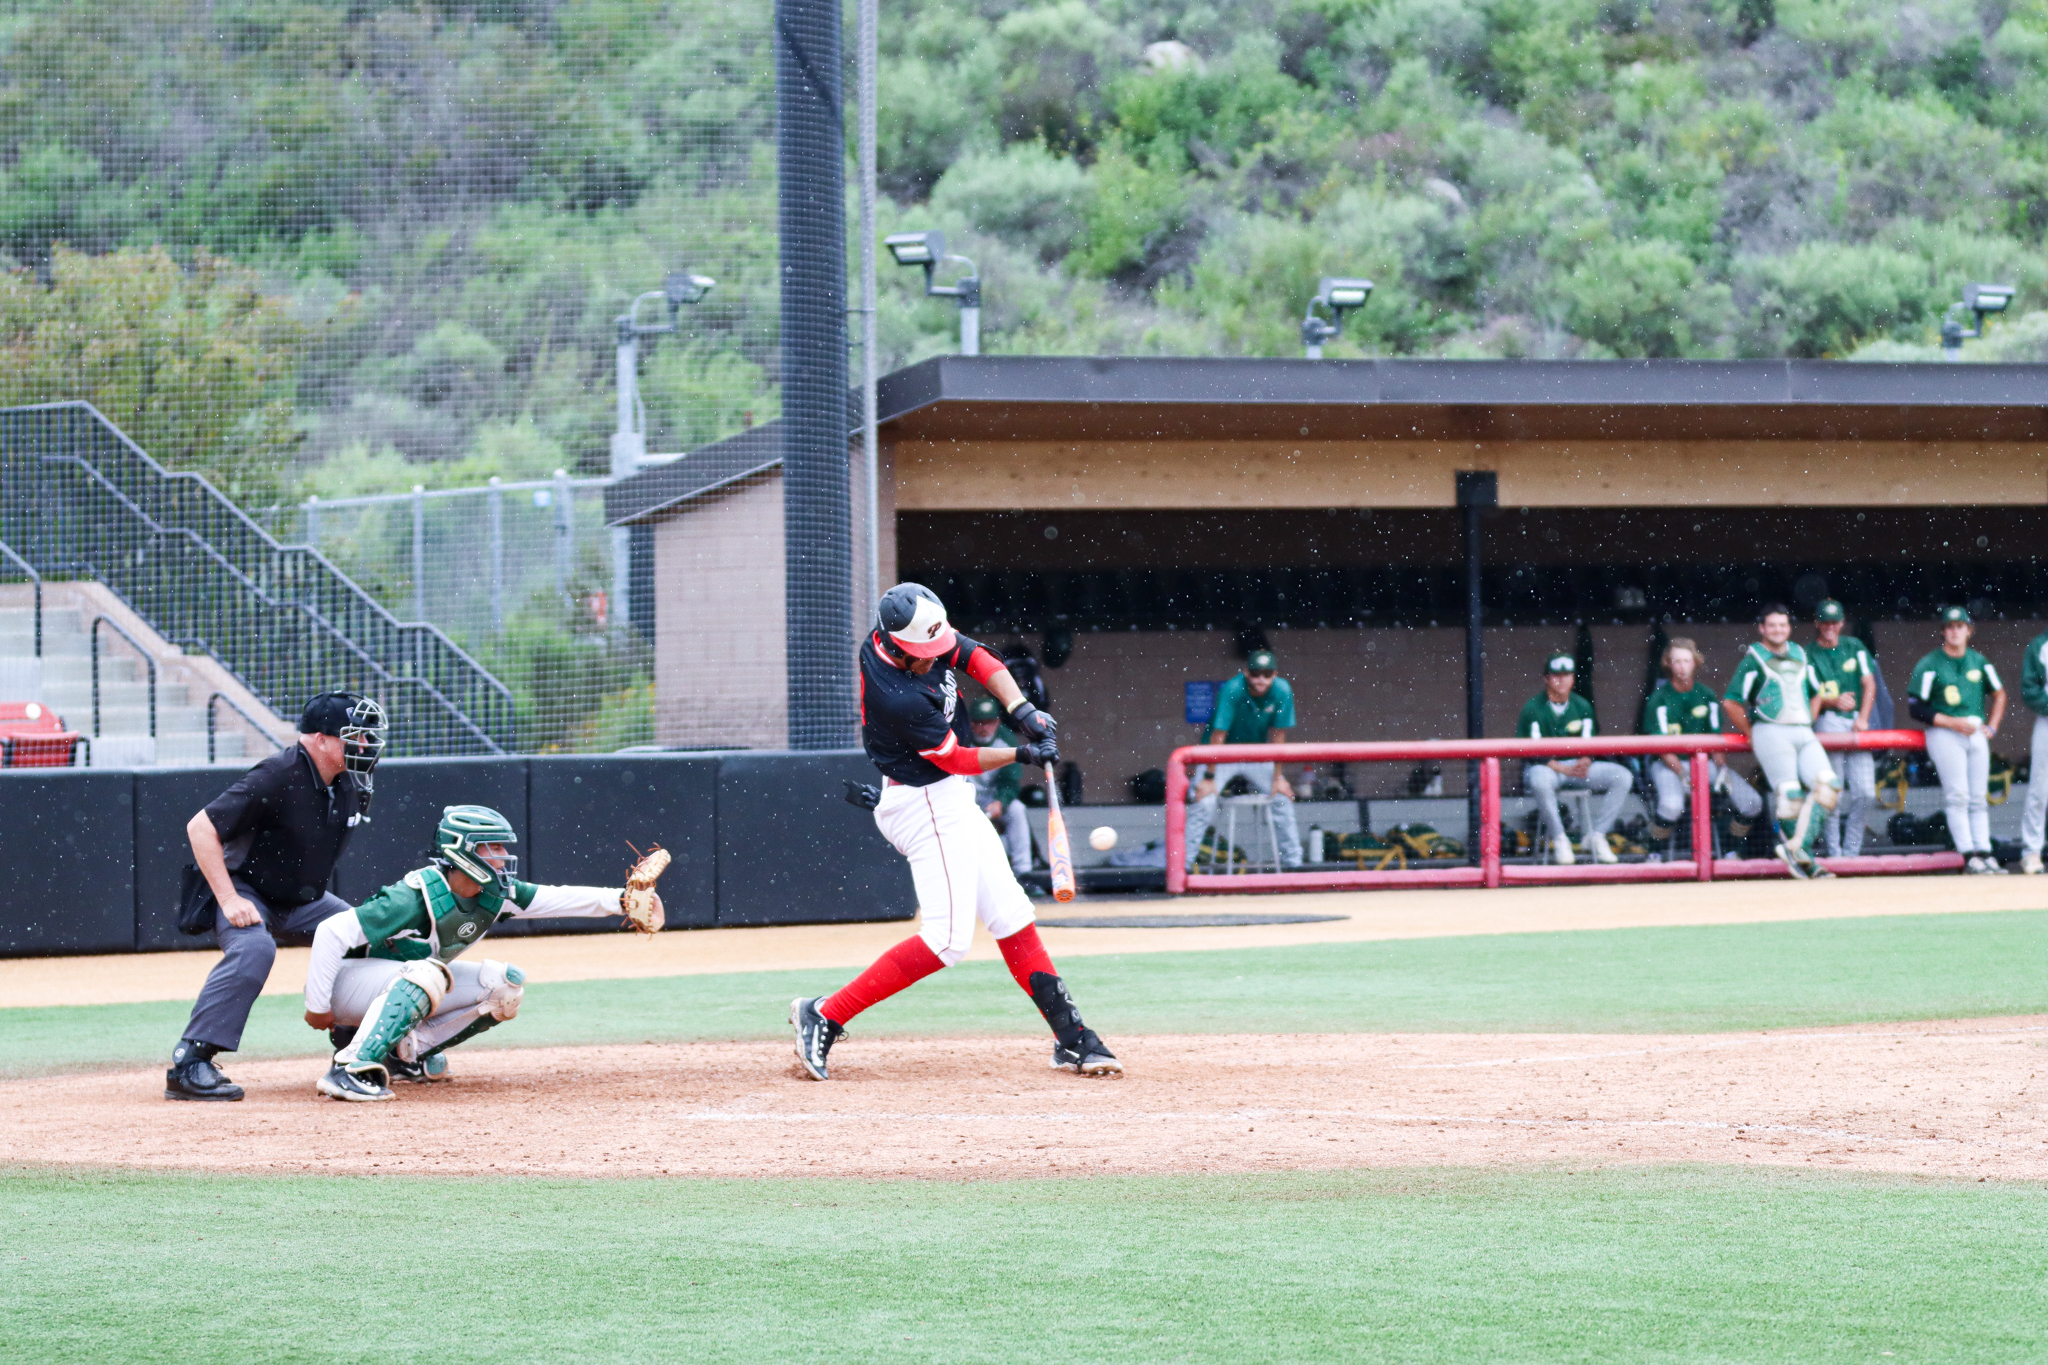 Quincy Scott had the game-winning home run in the eighth inning. Photo by Cara Heise.